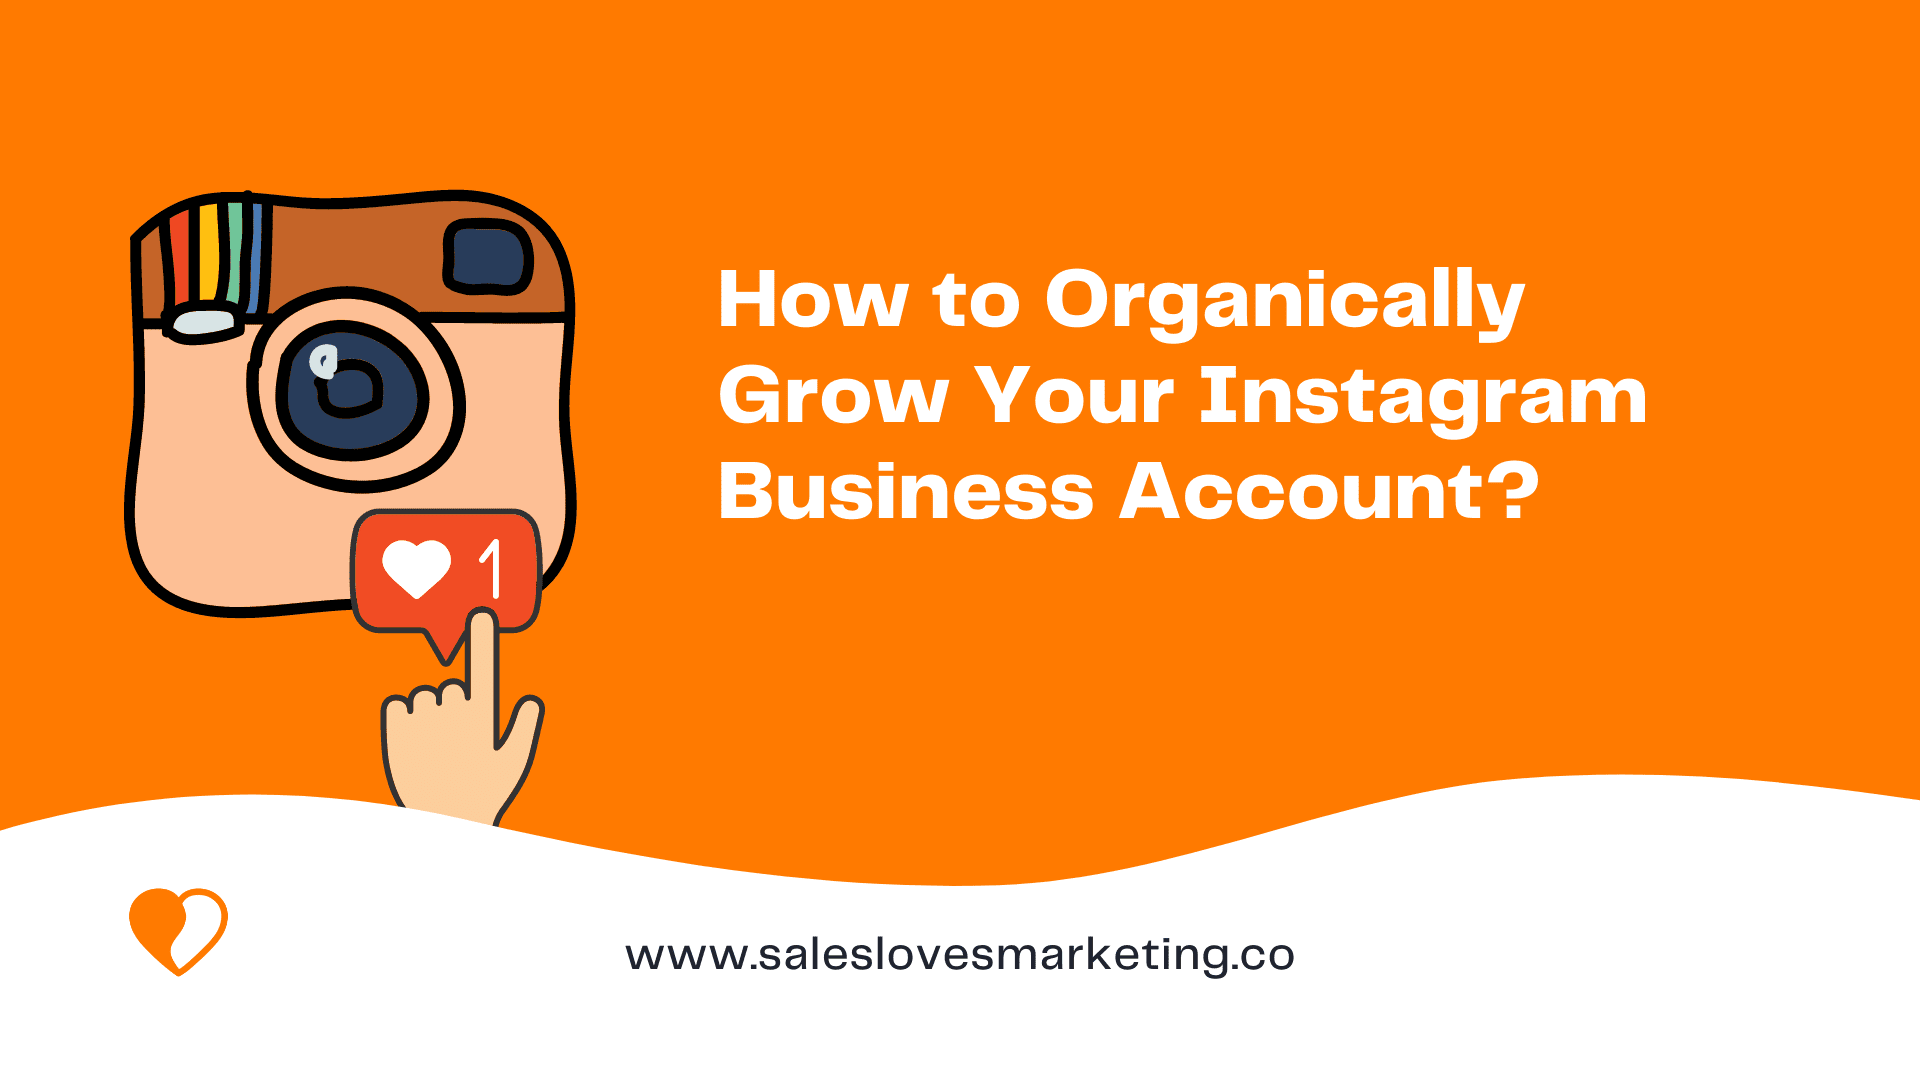 How to Organically Grow Your Instagram Business Account?